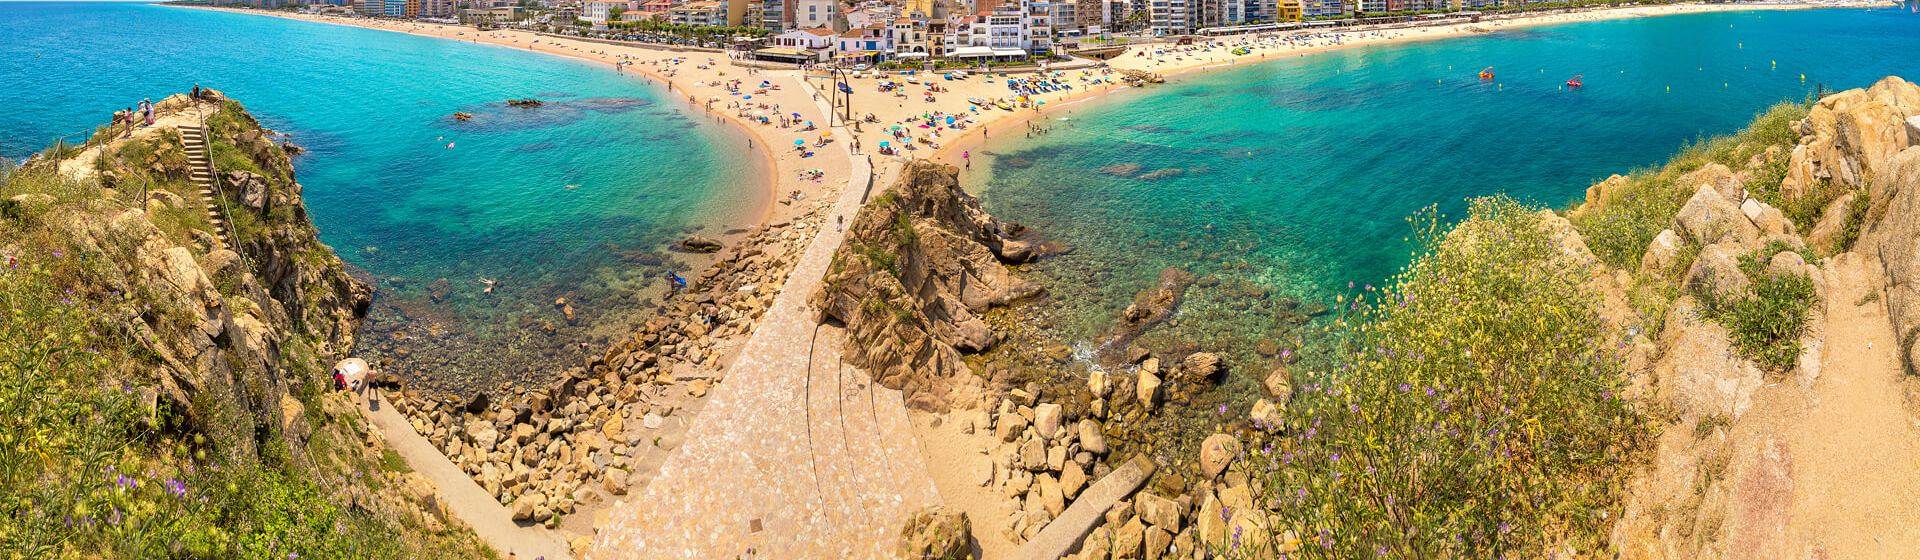 Holidays to Blanes Image